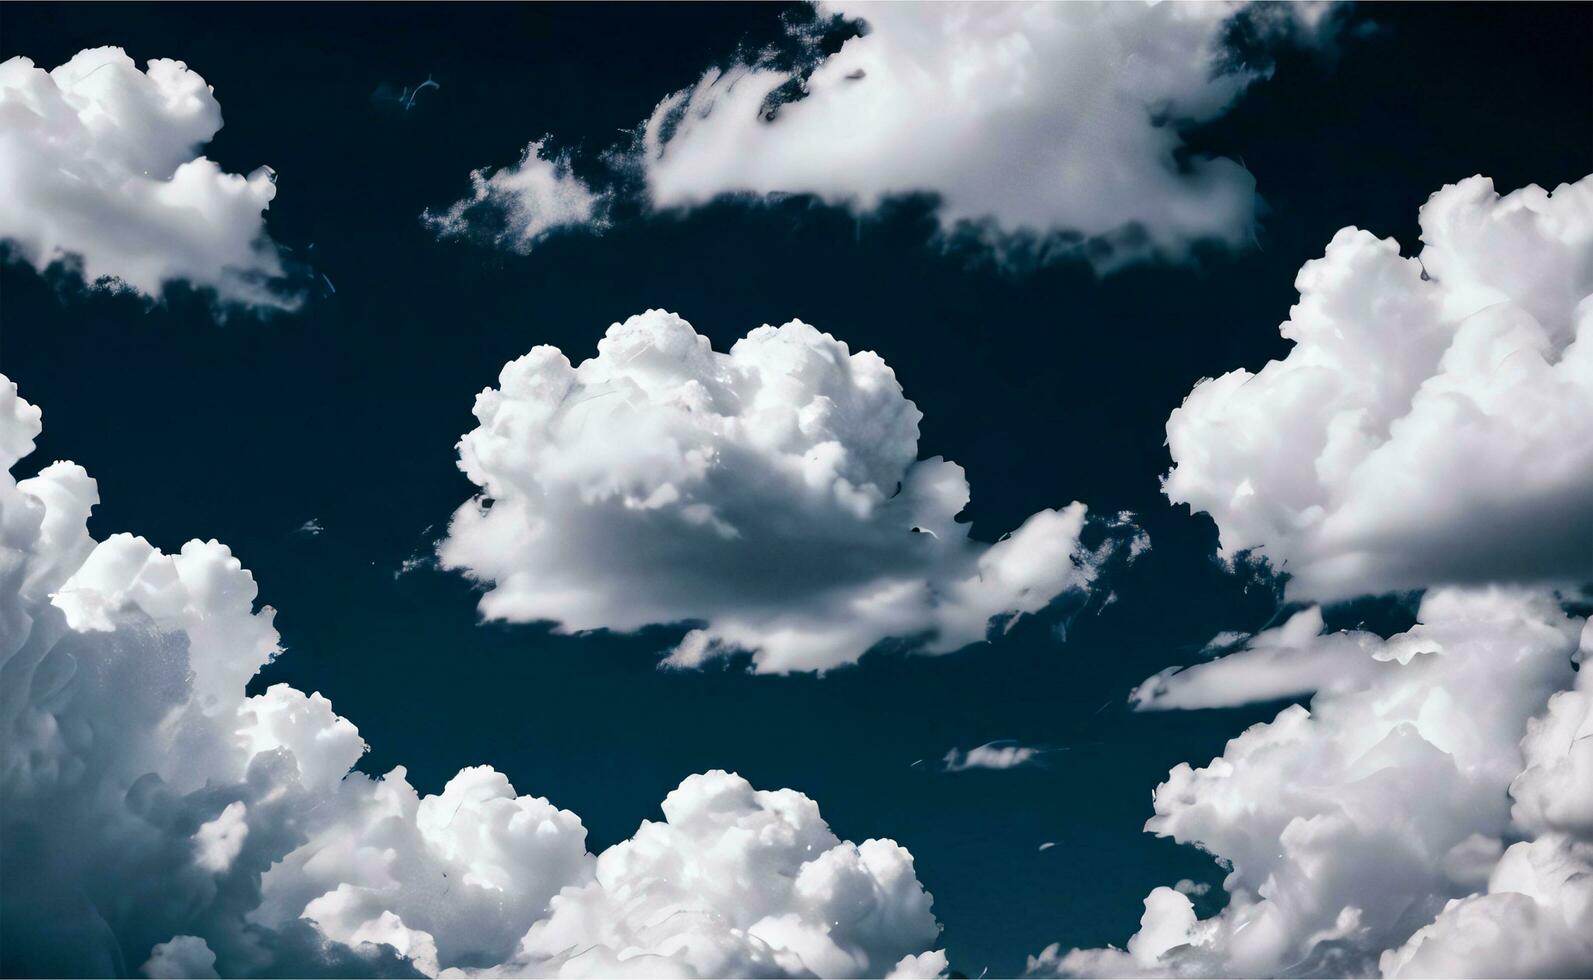 The Photo of the Fluffy Clouds Background Wallpaper